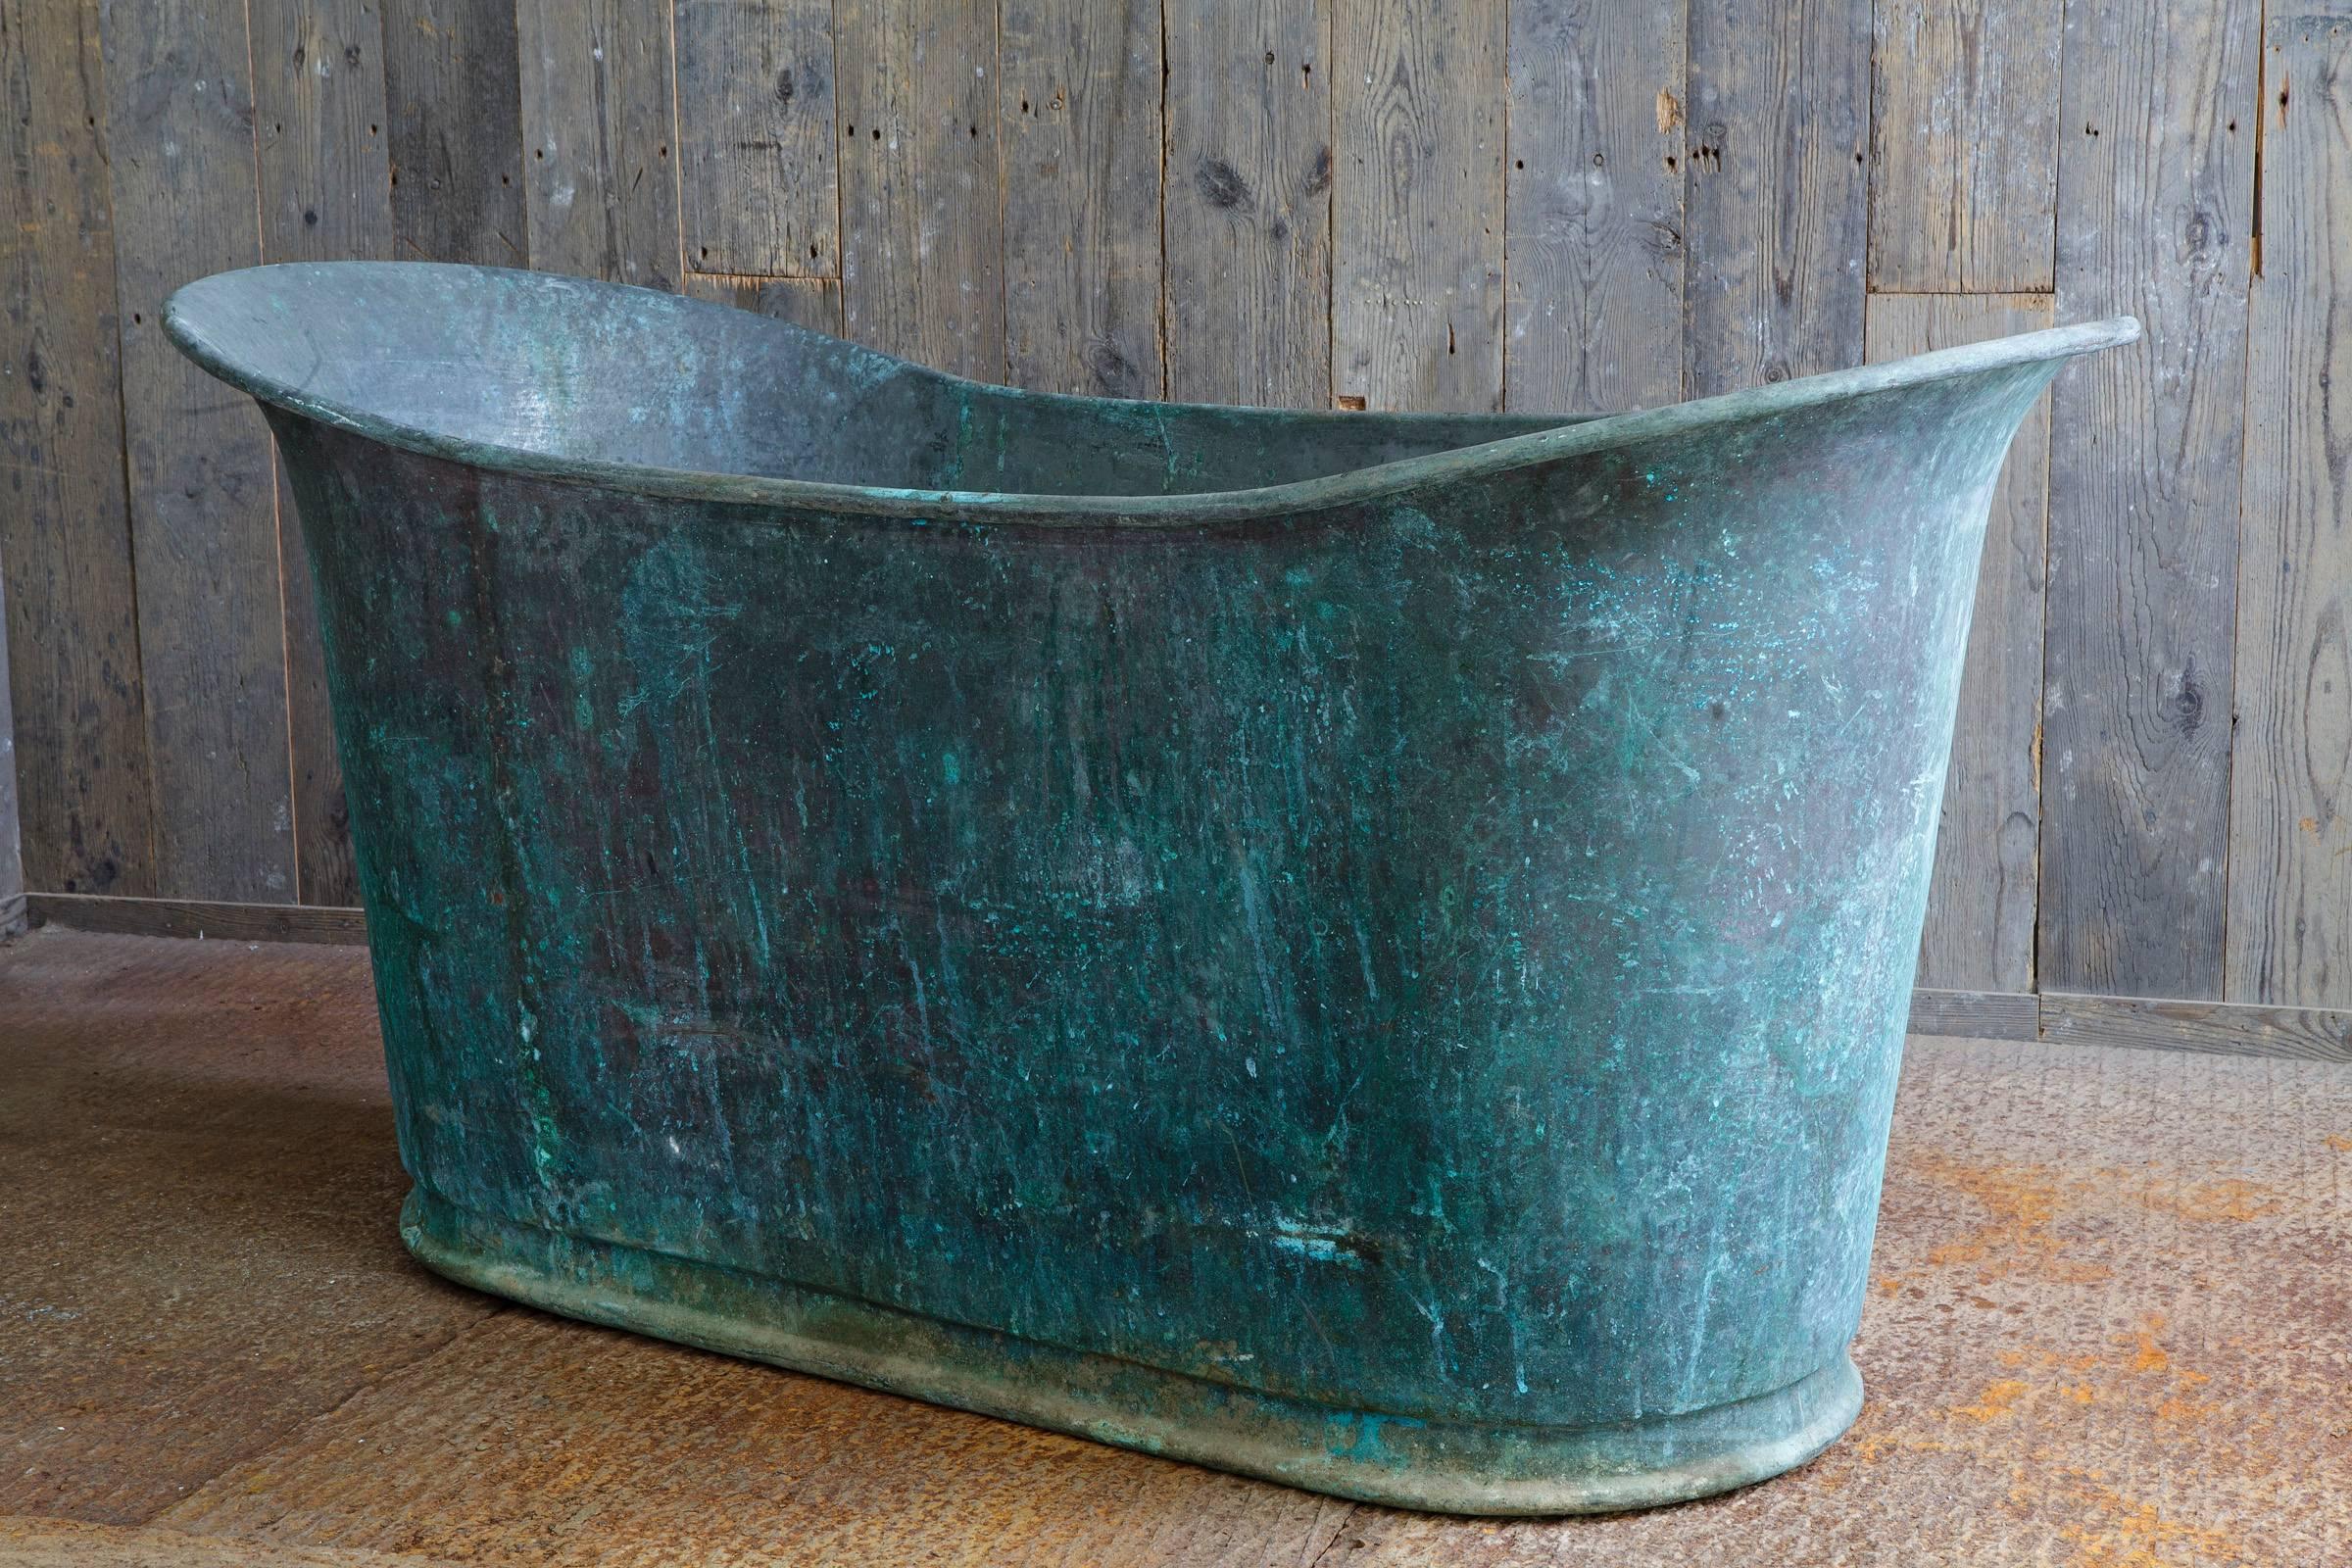 Antique copper bathtub on plinth, dating from circa 1800. This type of tub is the forerunner of the cast iron bath on feet. This type of bath with two high sides is called 'bain bateau' and very rare.

The copper has a beautiful blue/green patine.